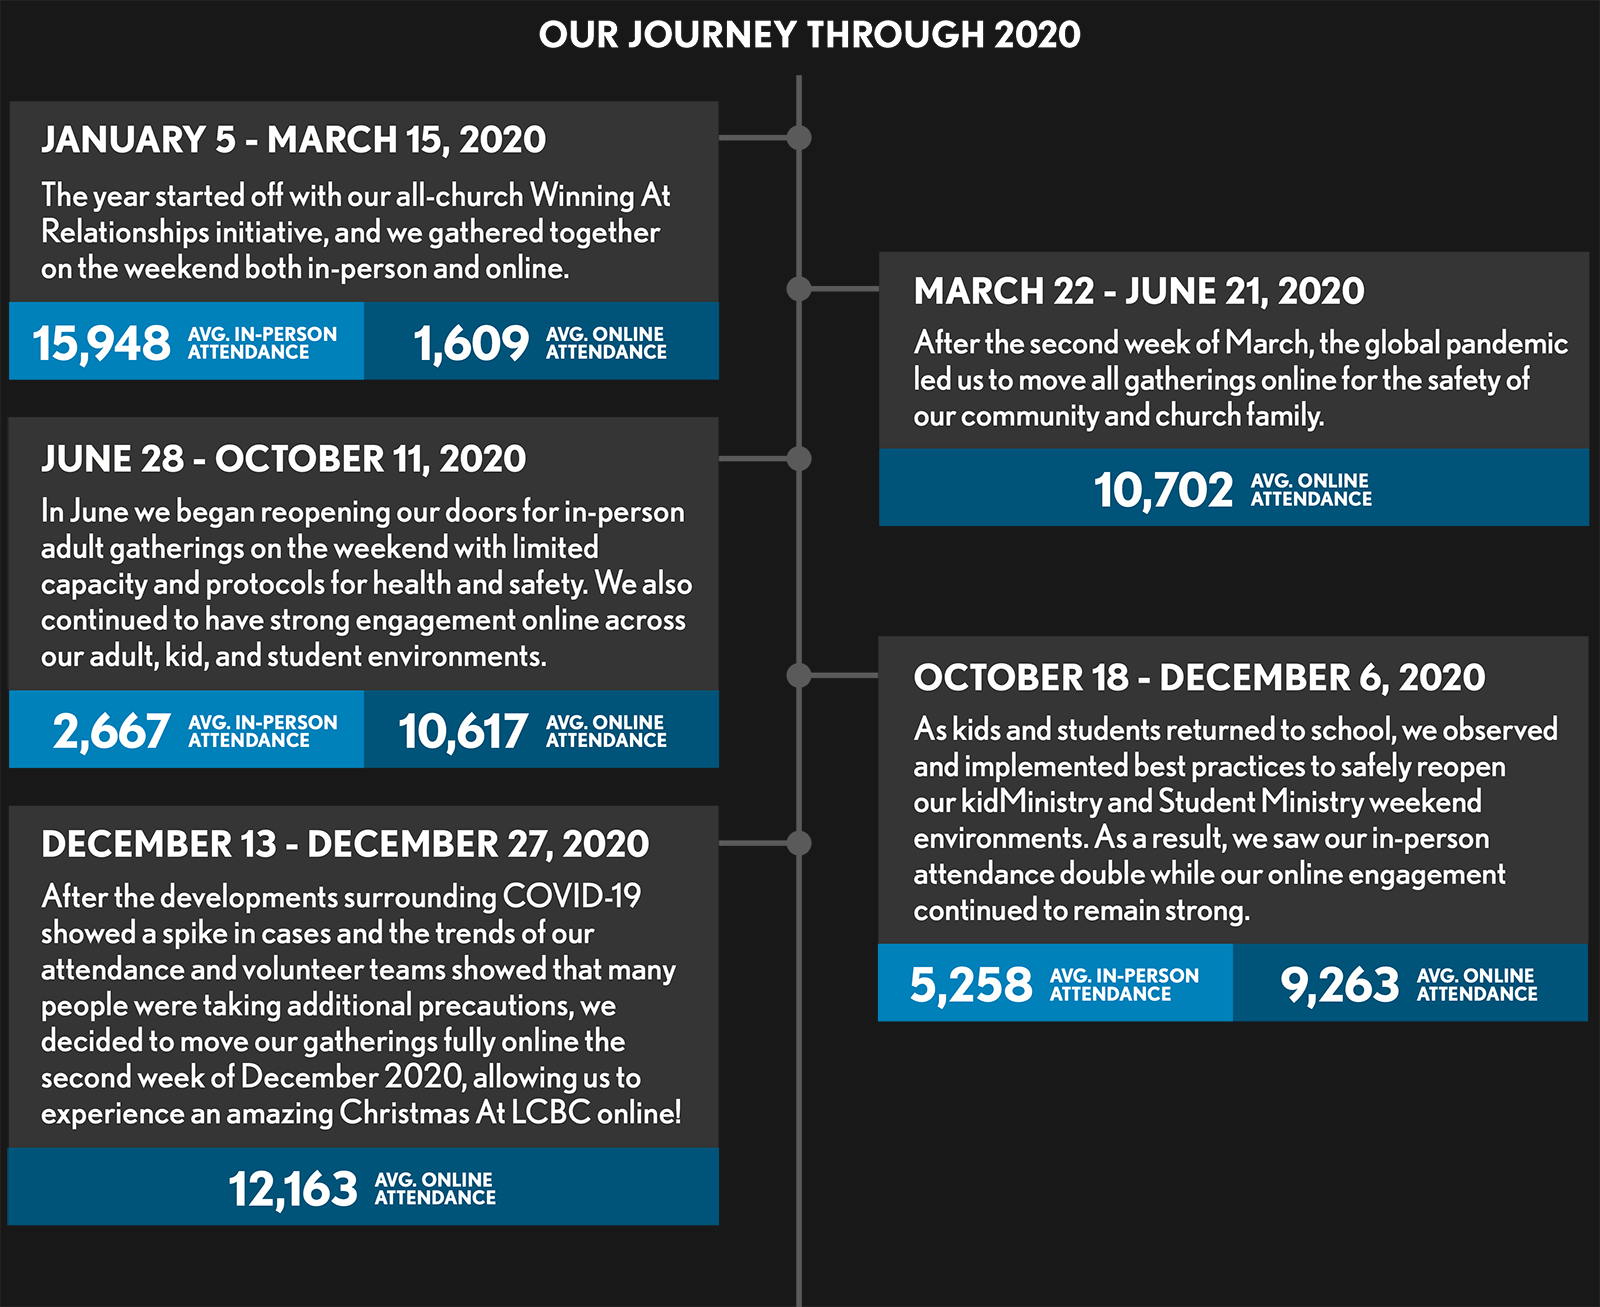 Our Journey Through 2020 - Timeline of Events